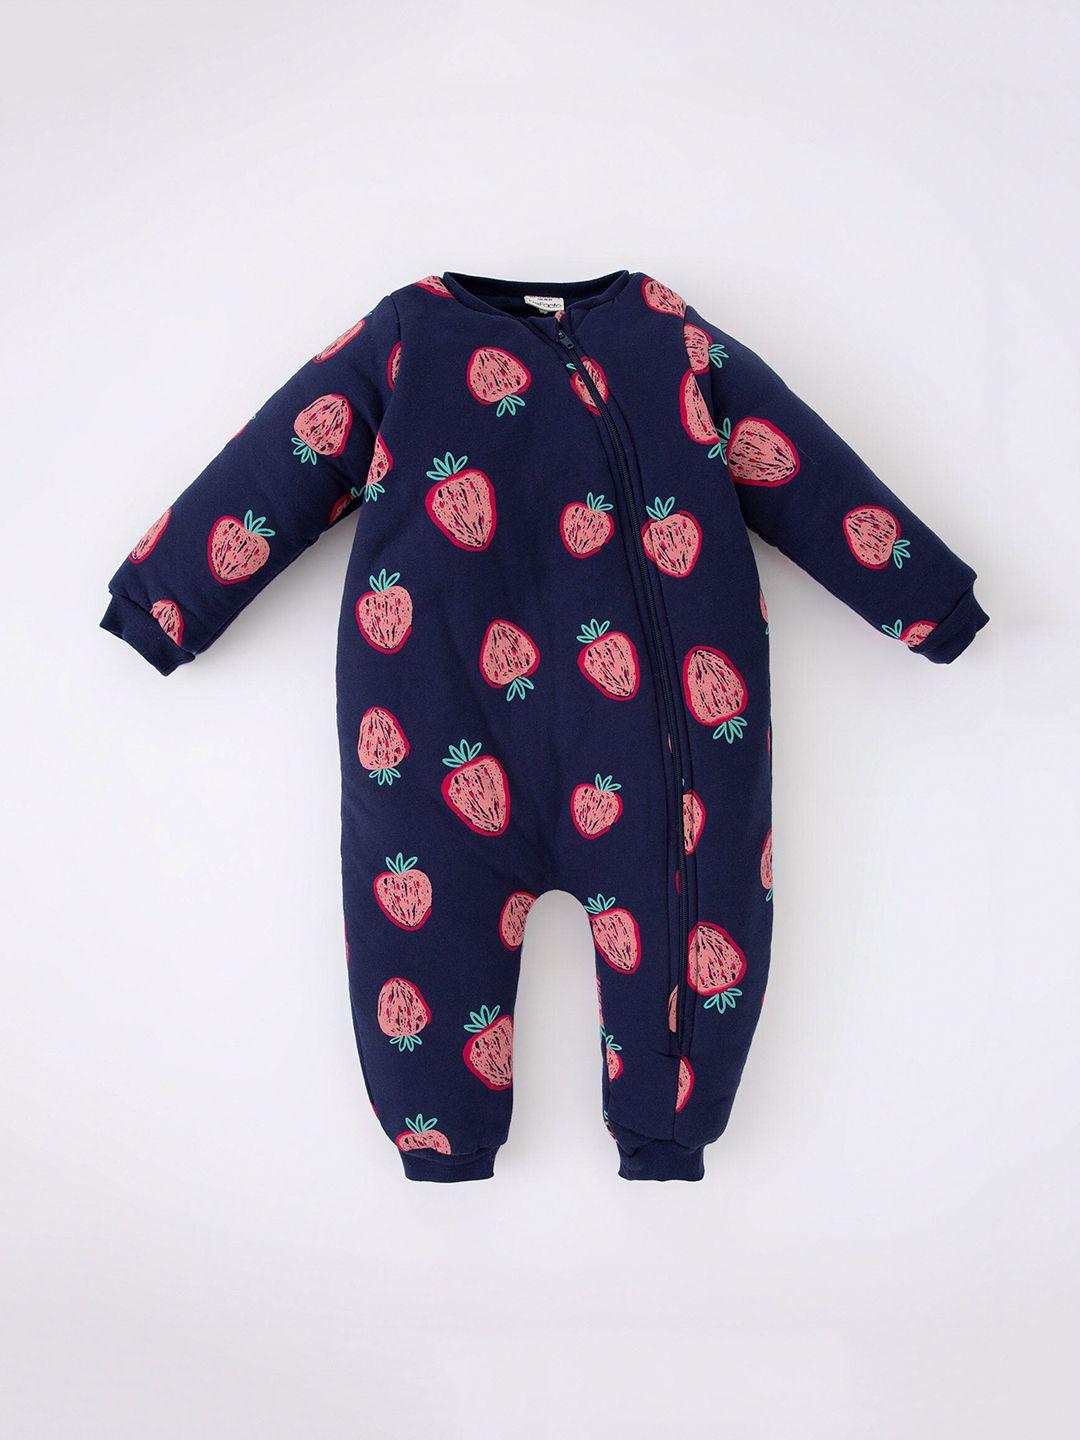 defacto infant girls navy blue & pink printed cotton rompers